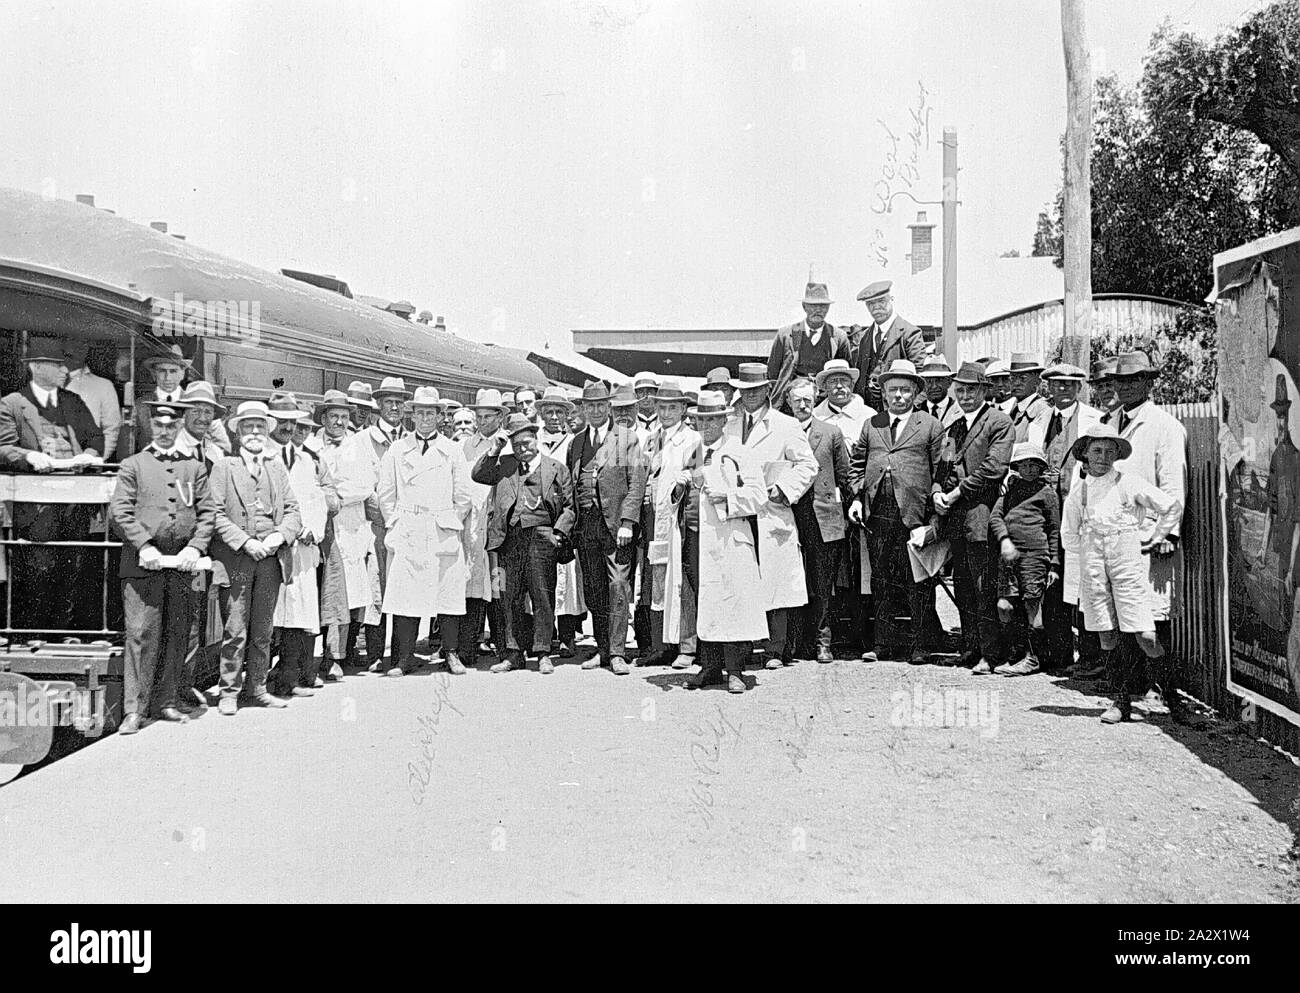 Negative - Rainbow, Victoria, 1925, A large group of people gathered on the platform of Rainbow Railway Station for the visit of the Better Farming Train. Many men are wearing suits, and some wear white coats (possibly 'labcoats') over their clothes. A man standing on the far left is wearing station staff uniform. An advertising poster is mounted on the platform fence Stock Photo